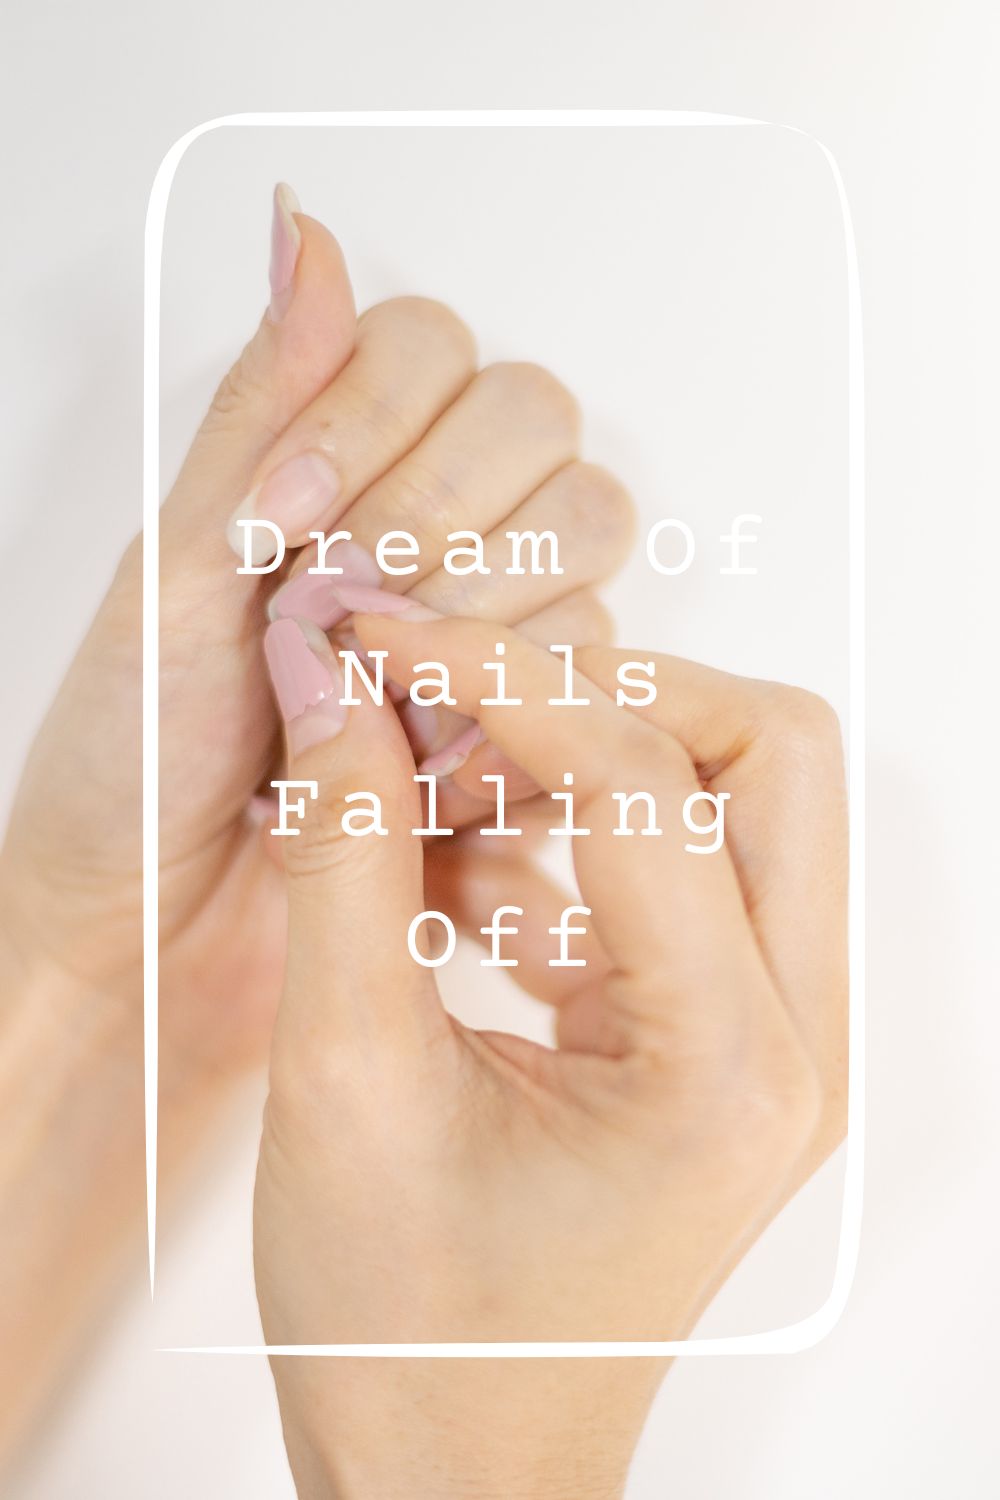 Dream Of Nails Falling Off Meanings 2